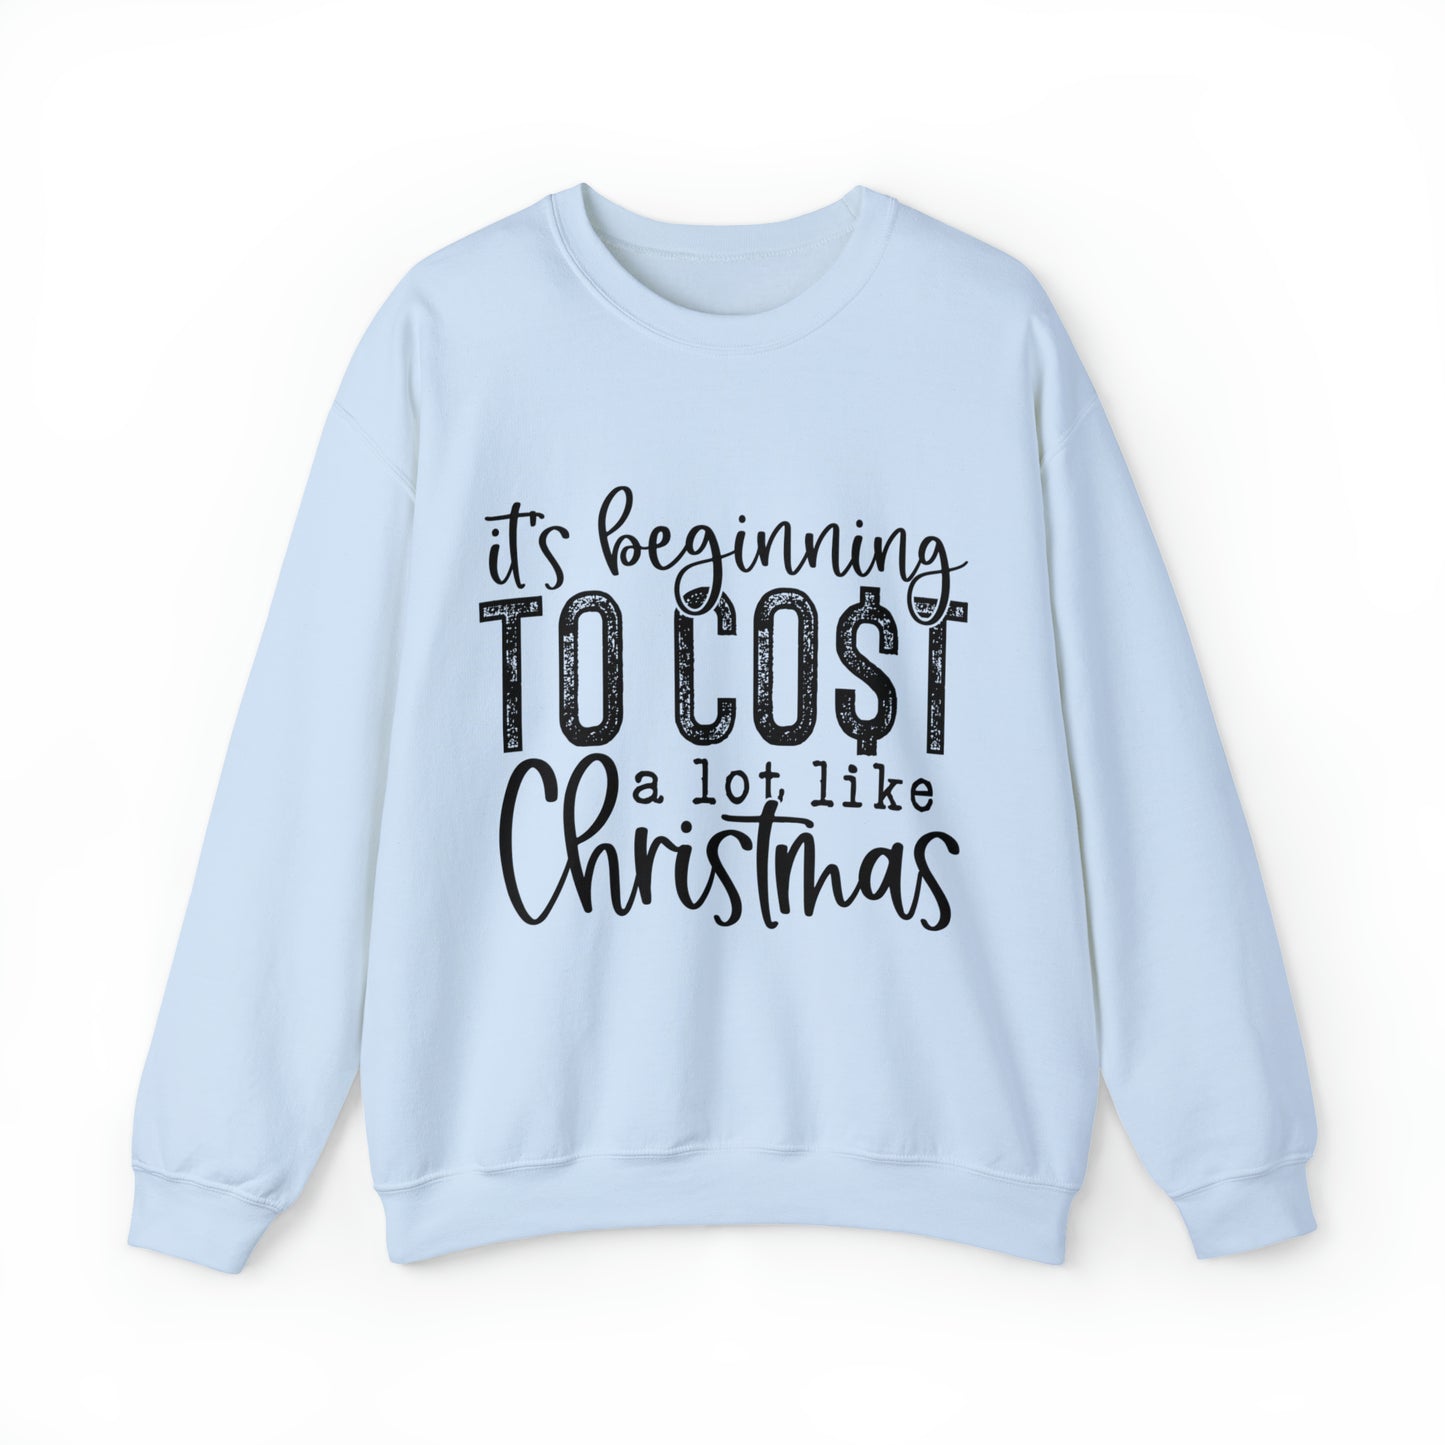 It's Beginning to Cost a Lot Like Christmas Unisex Adult Funny Christmas Shirt with Black